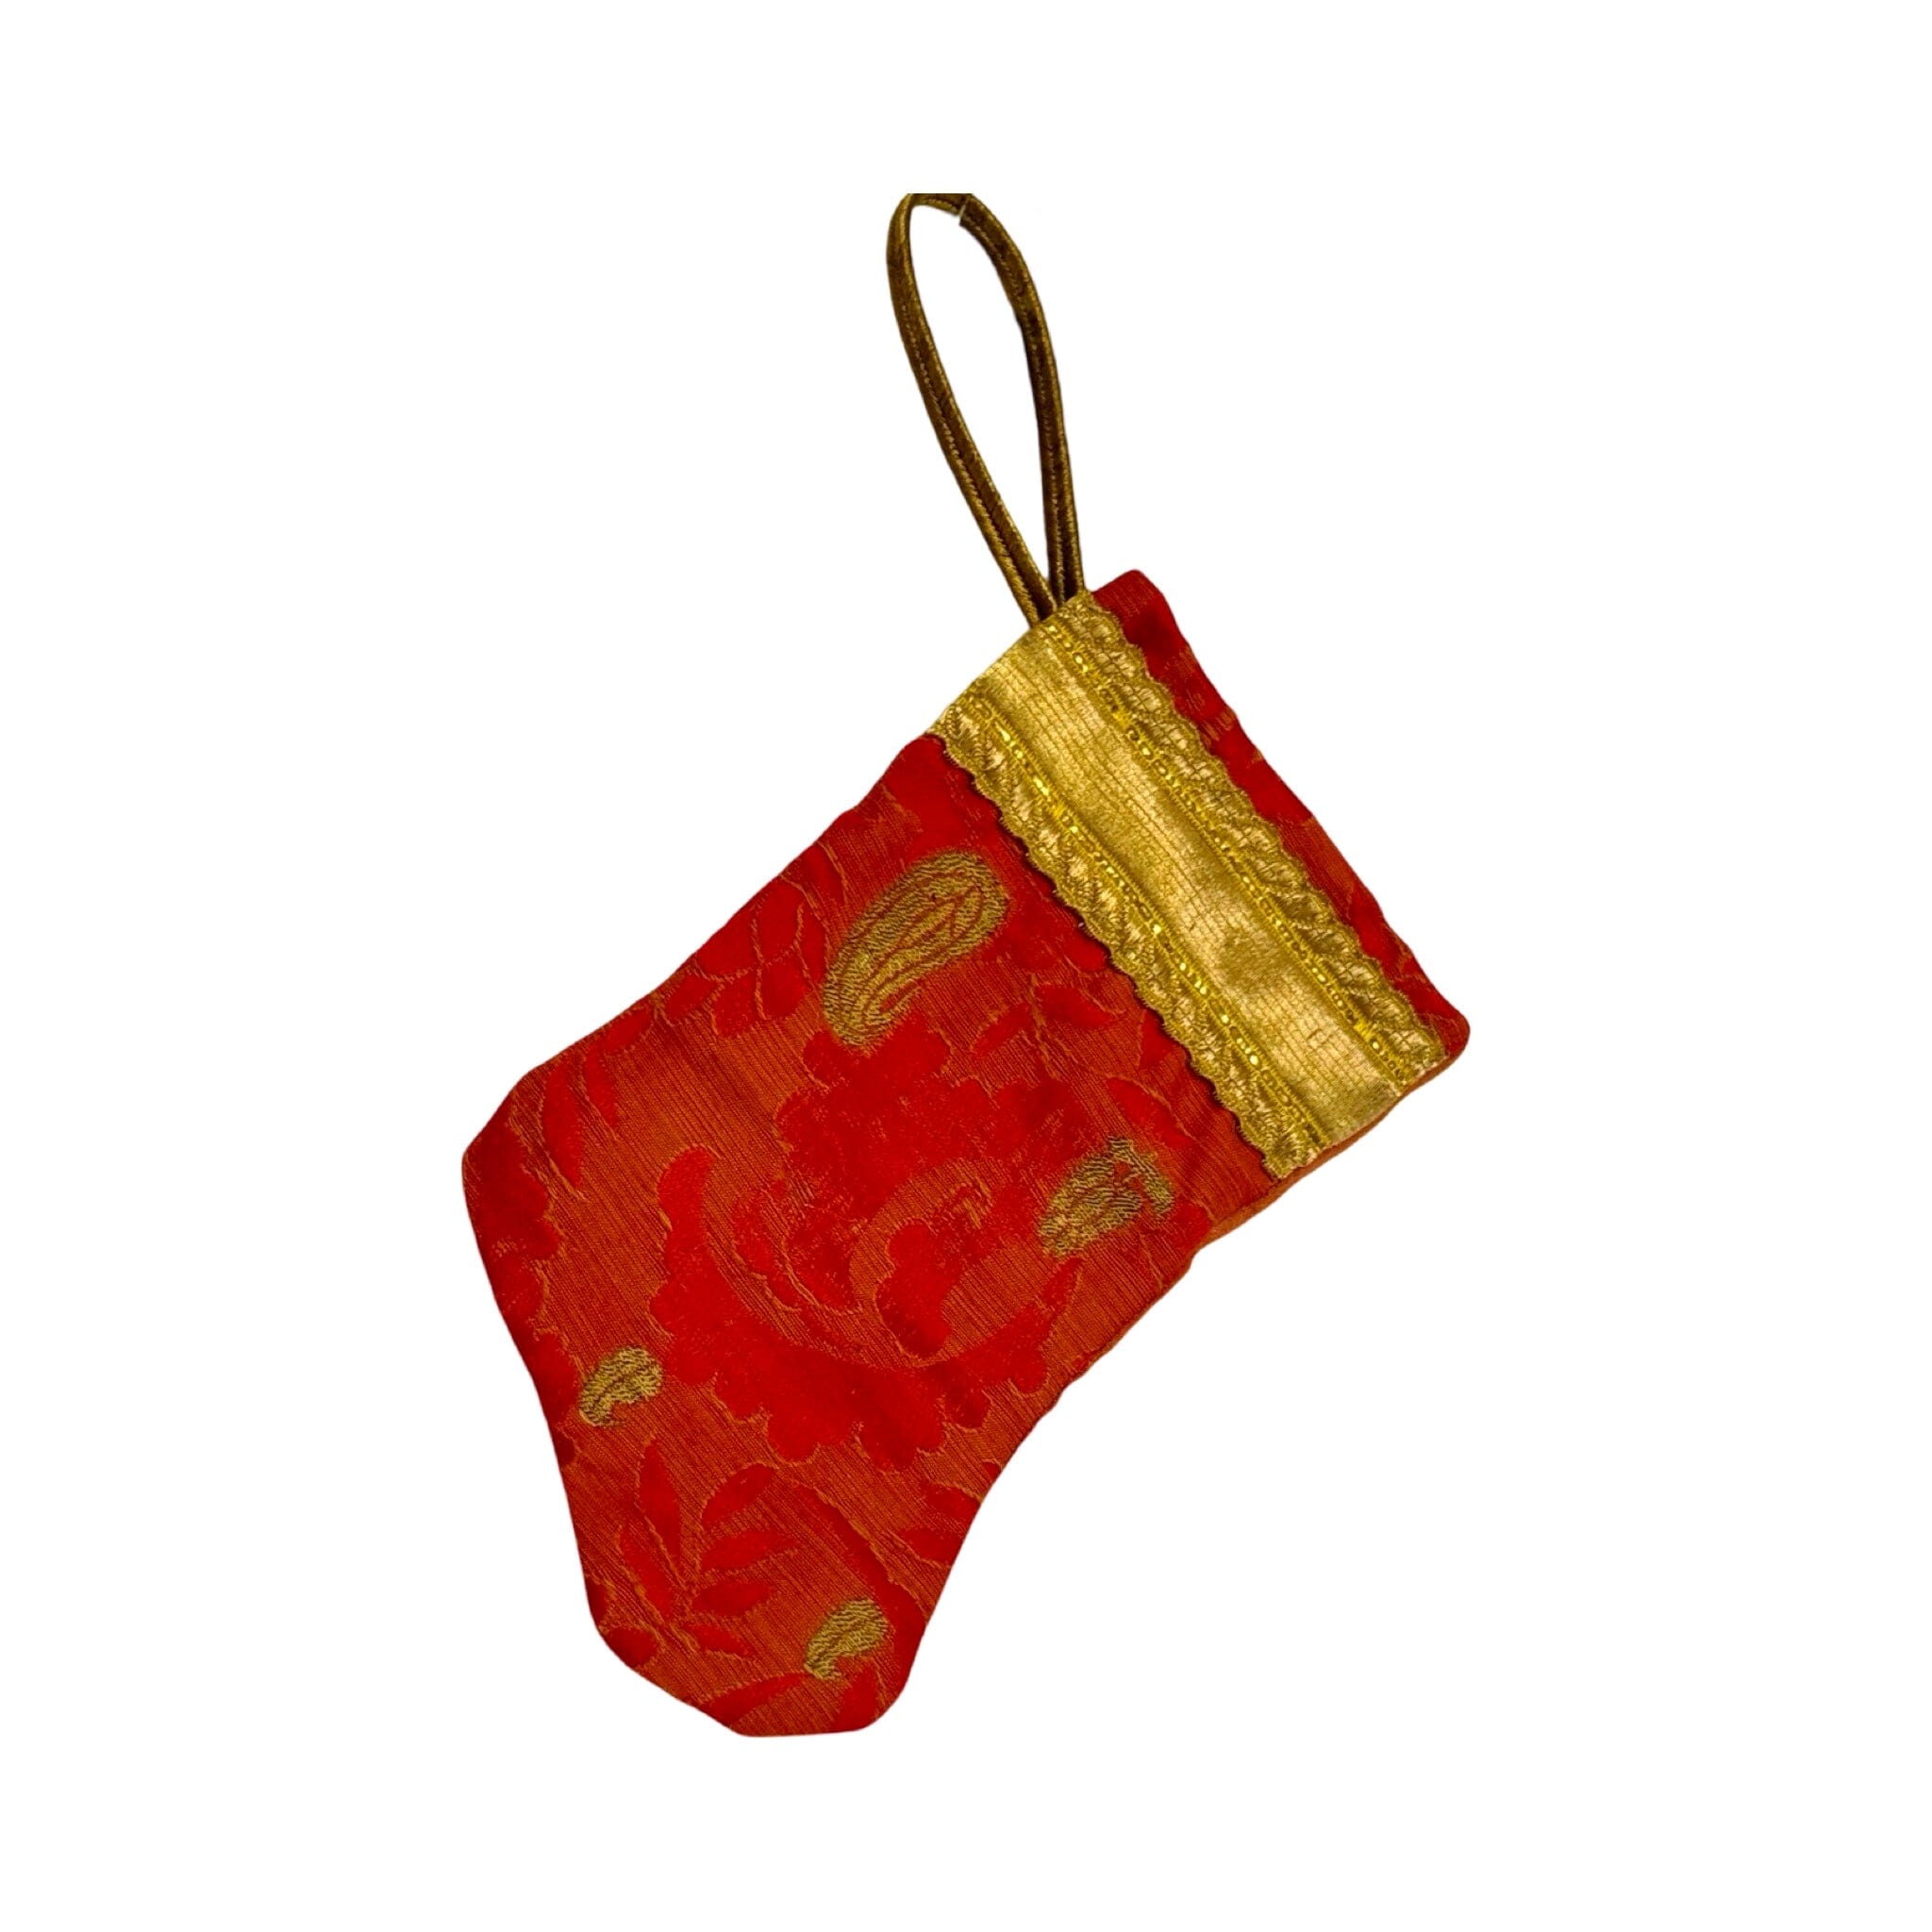 Handmade Mini Stocking Made From Vintage Fabric and Trims- Red and Gold Ornament B. Viz Design I 